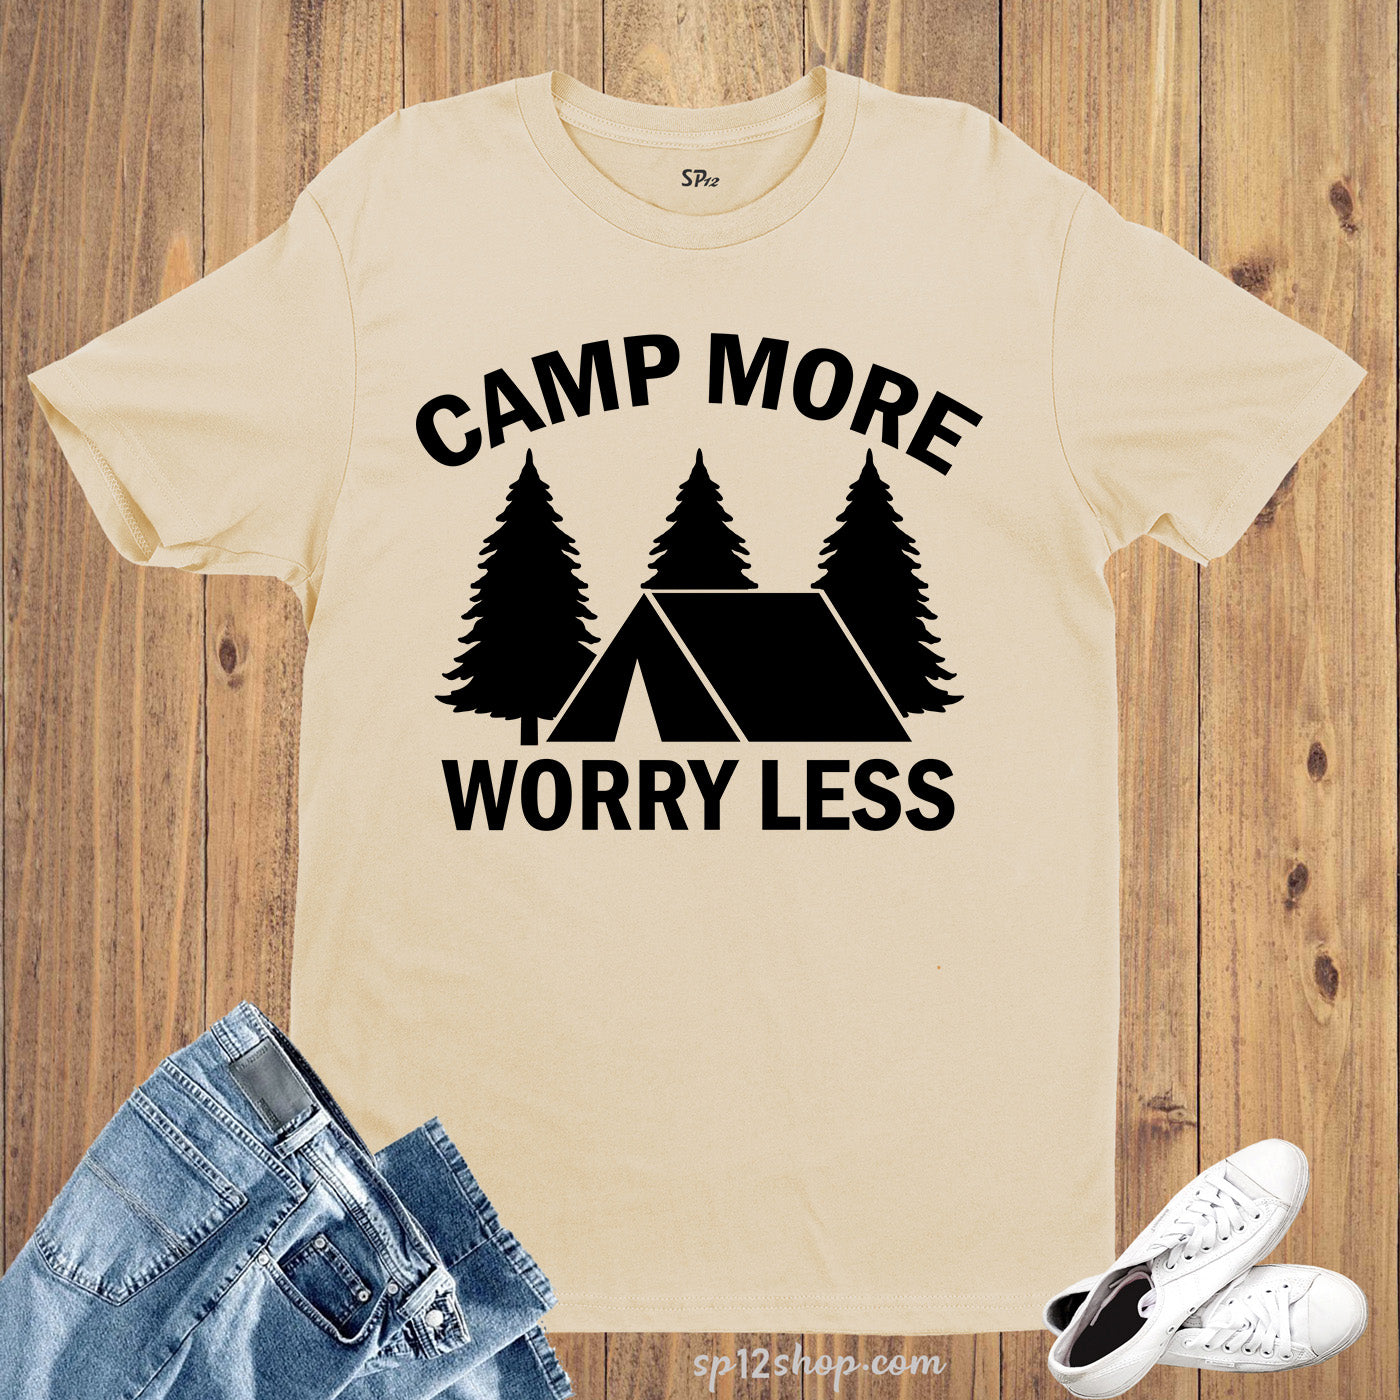 Camp More Worry Less T Shirt